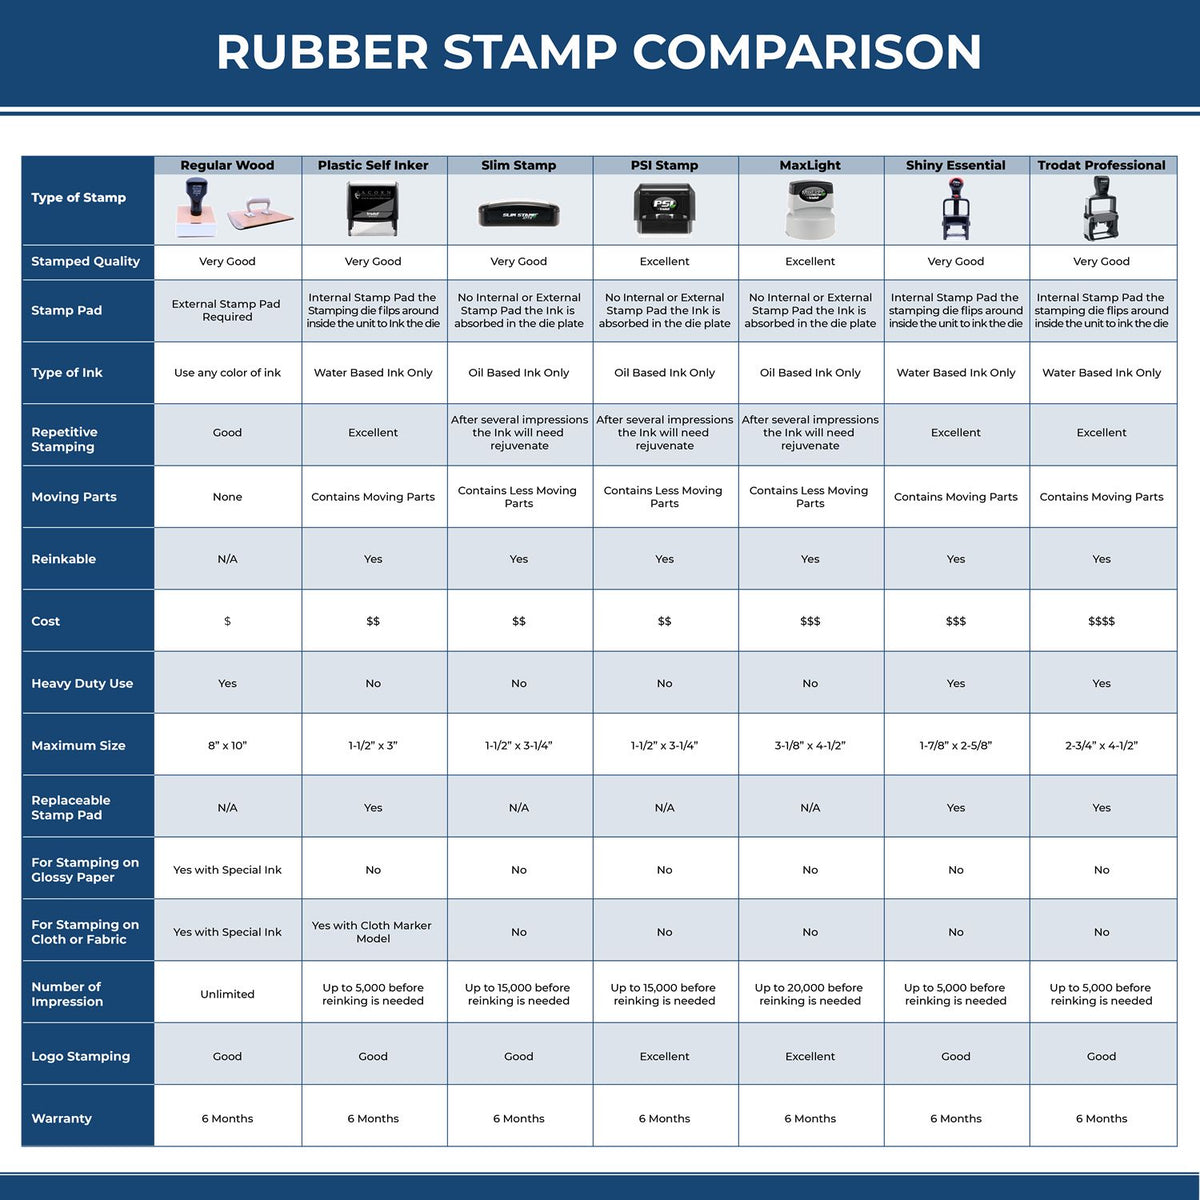 A comparison chart for the different types of mount models available for the Maine Landscape Architectural Seal Stamp.